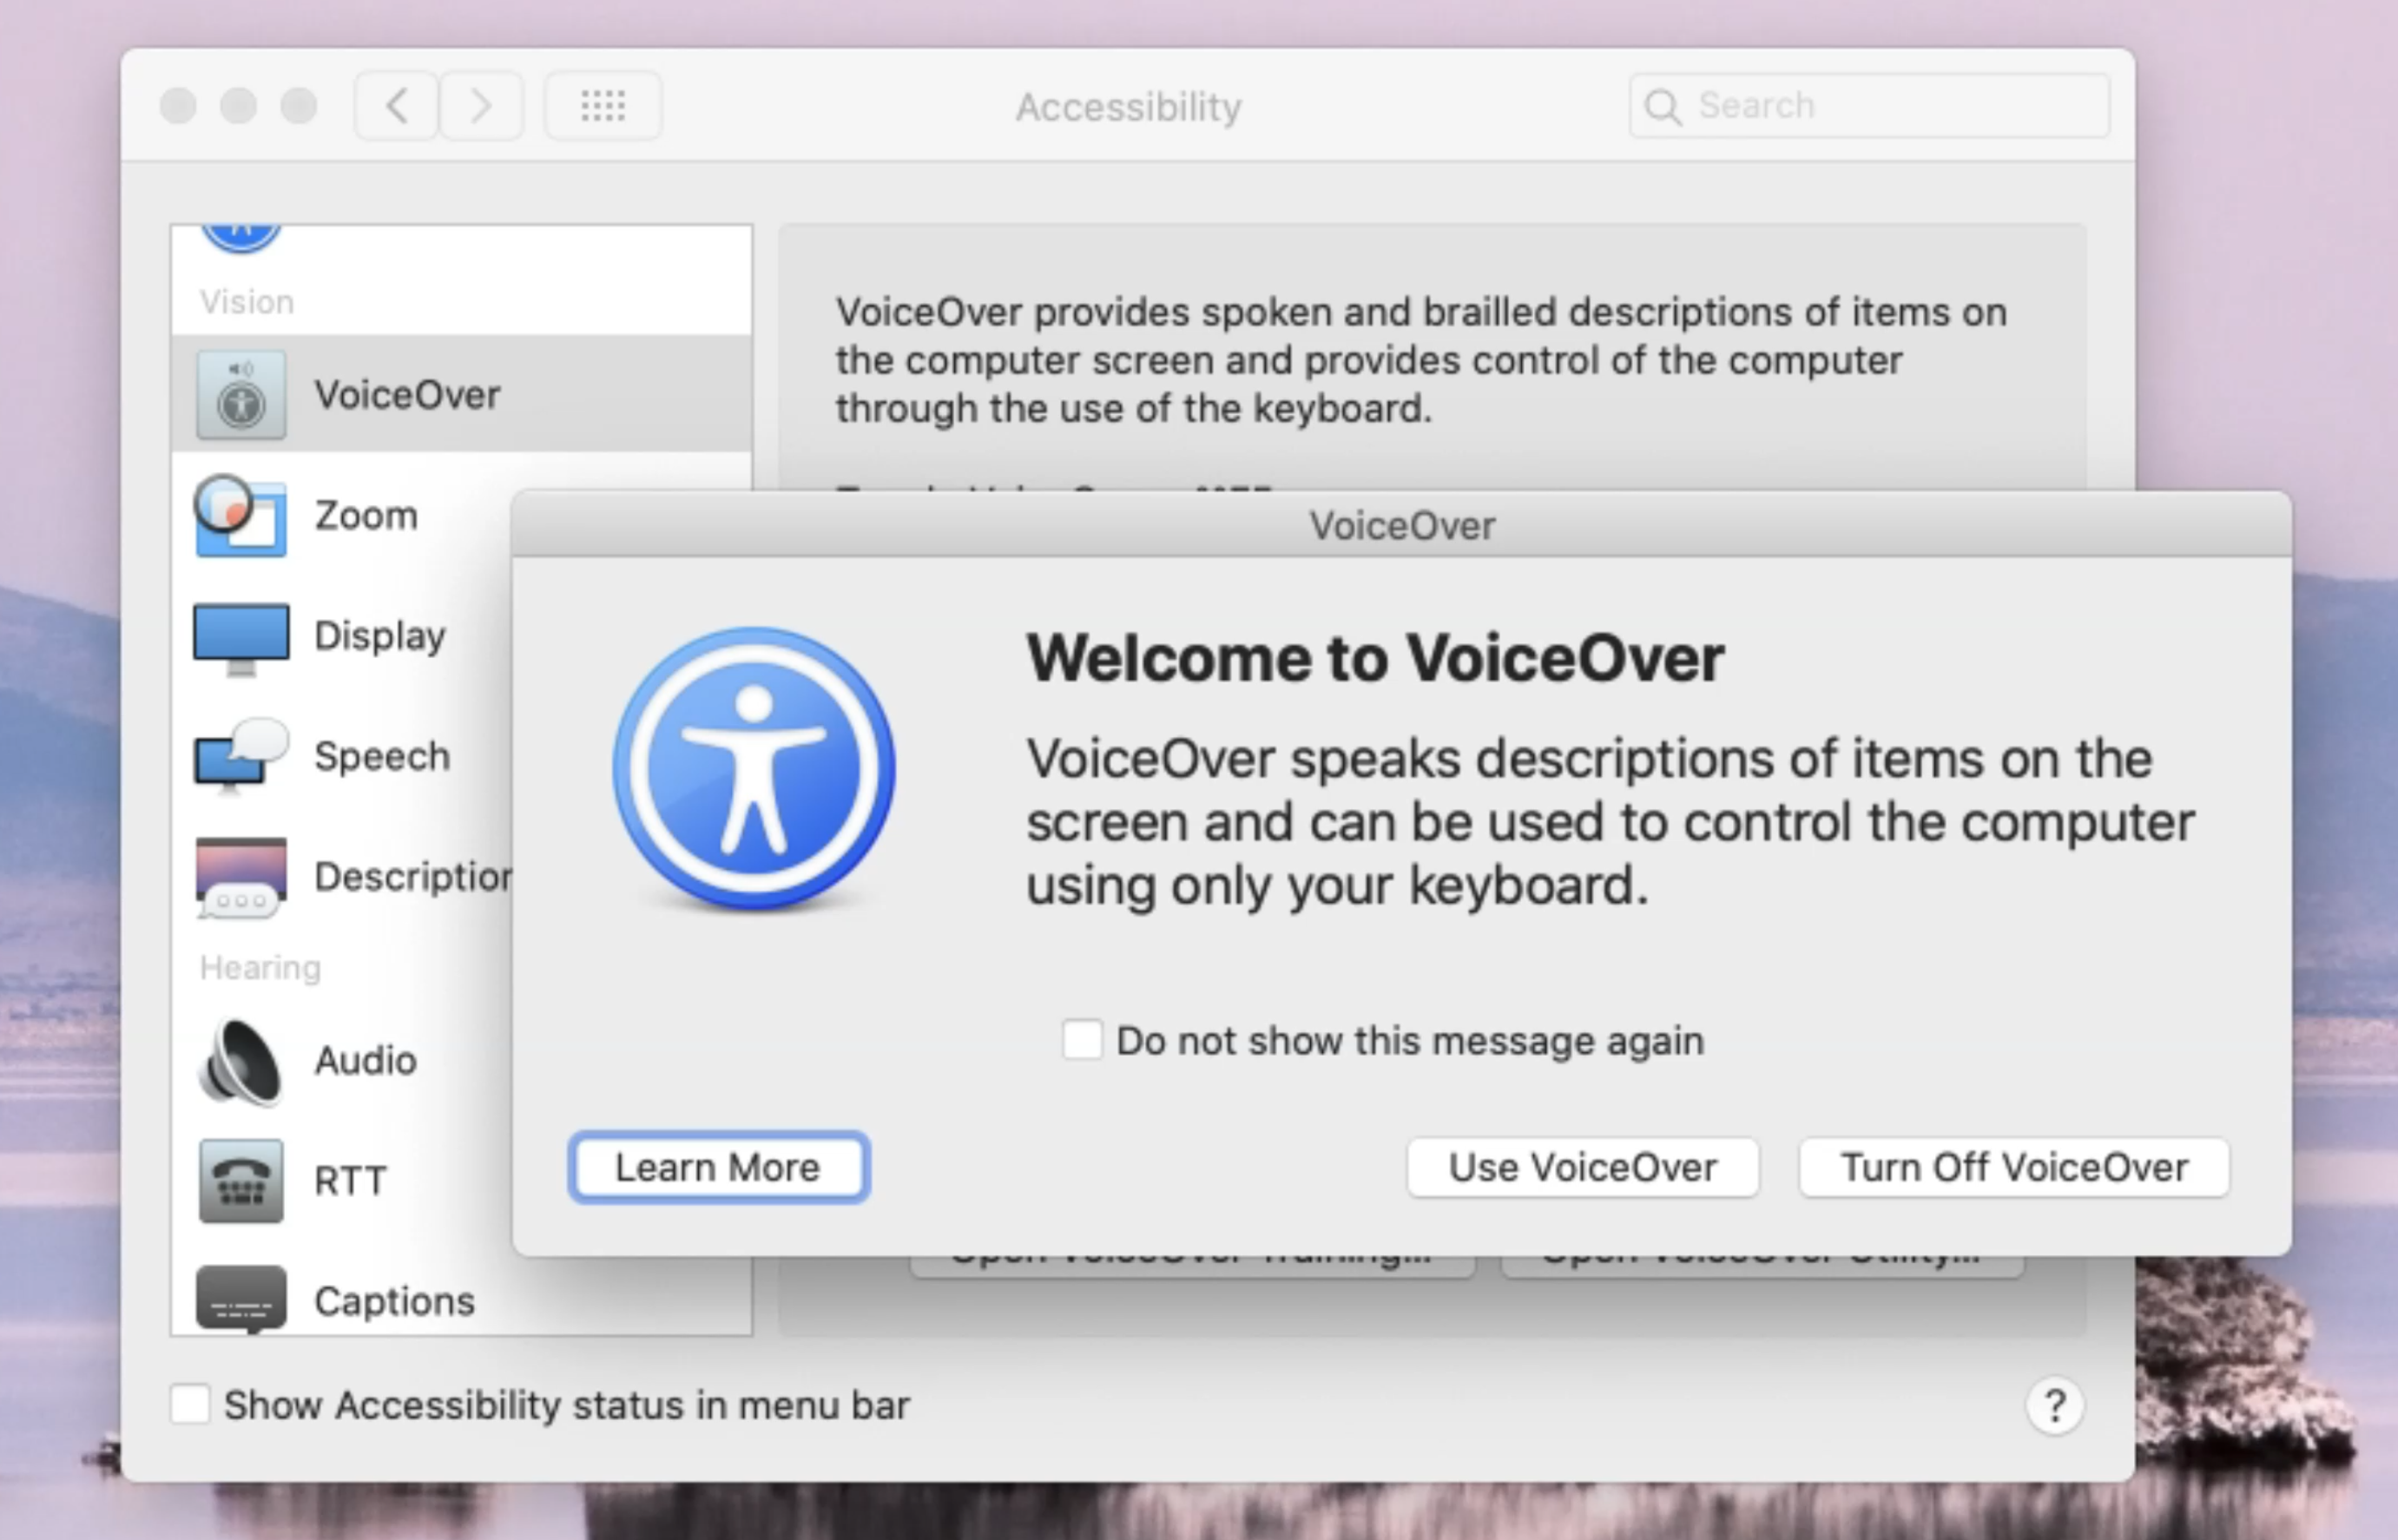 Welcome to VoiceOver popups